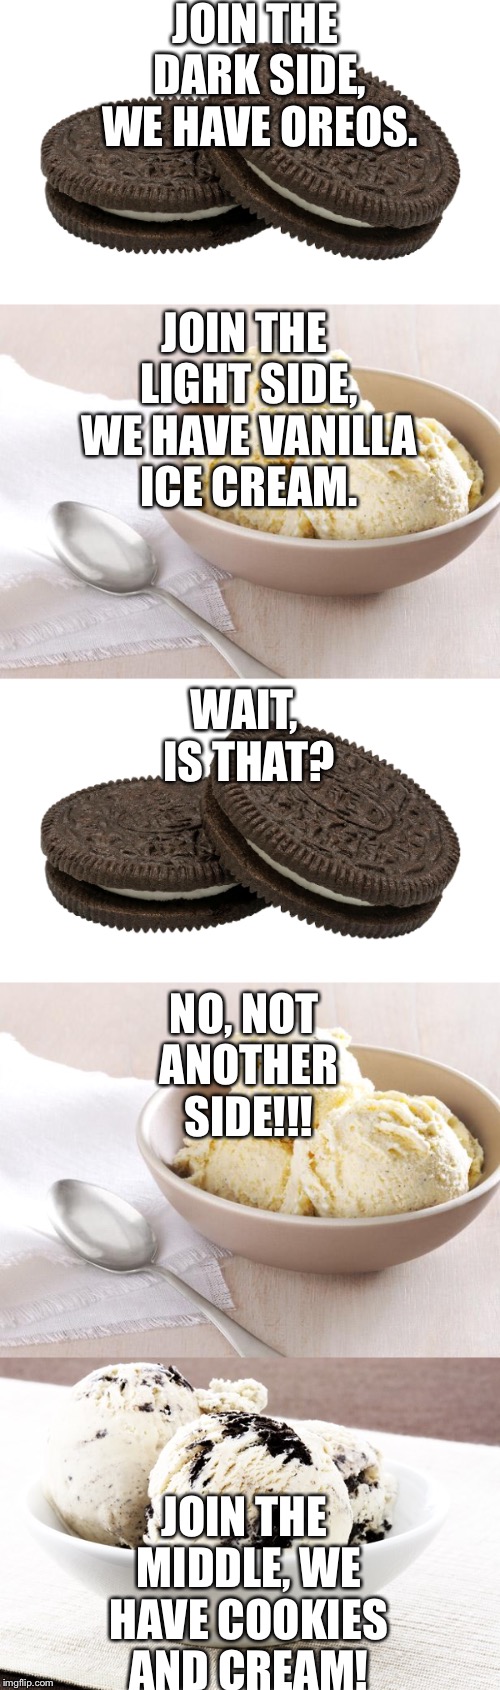 The new side of the force! | JOIN THE DARK SIDE, WE HAVE OREOS. JOIN THE LIGHT SIDE, WE HAVE VANILLA ICE CREAM. WAIT, IS THAT? NO, NOT ANOTHER SIDE!!! JOIN THE MIDDLE, WE HAVE COOKIES AND CREAM! | image tagged in meme | made w/ Imgflip meme maker